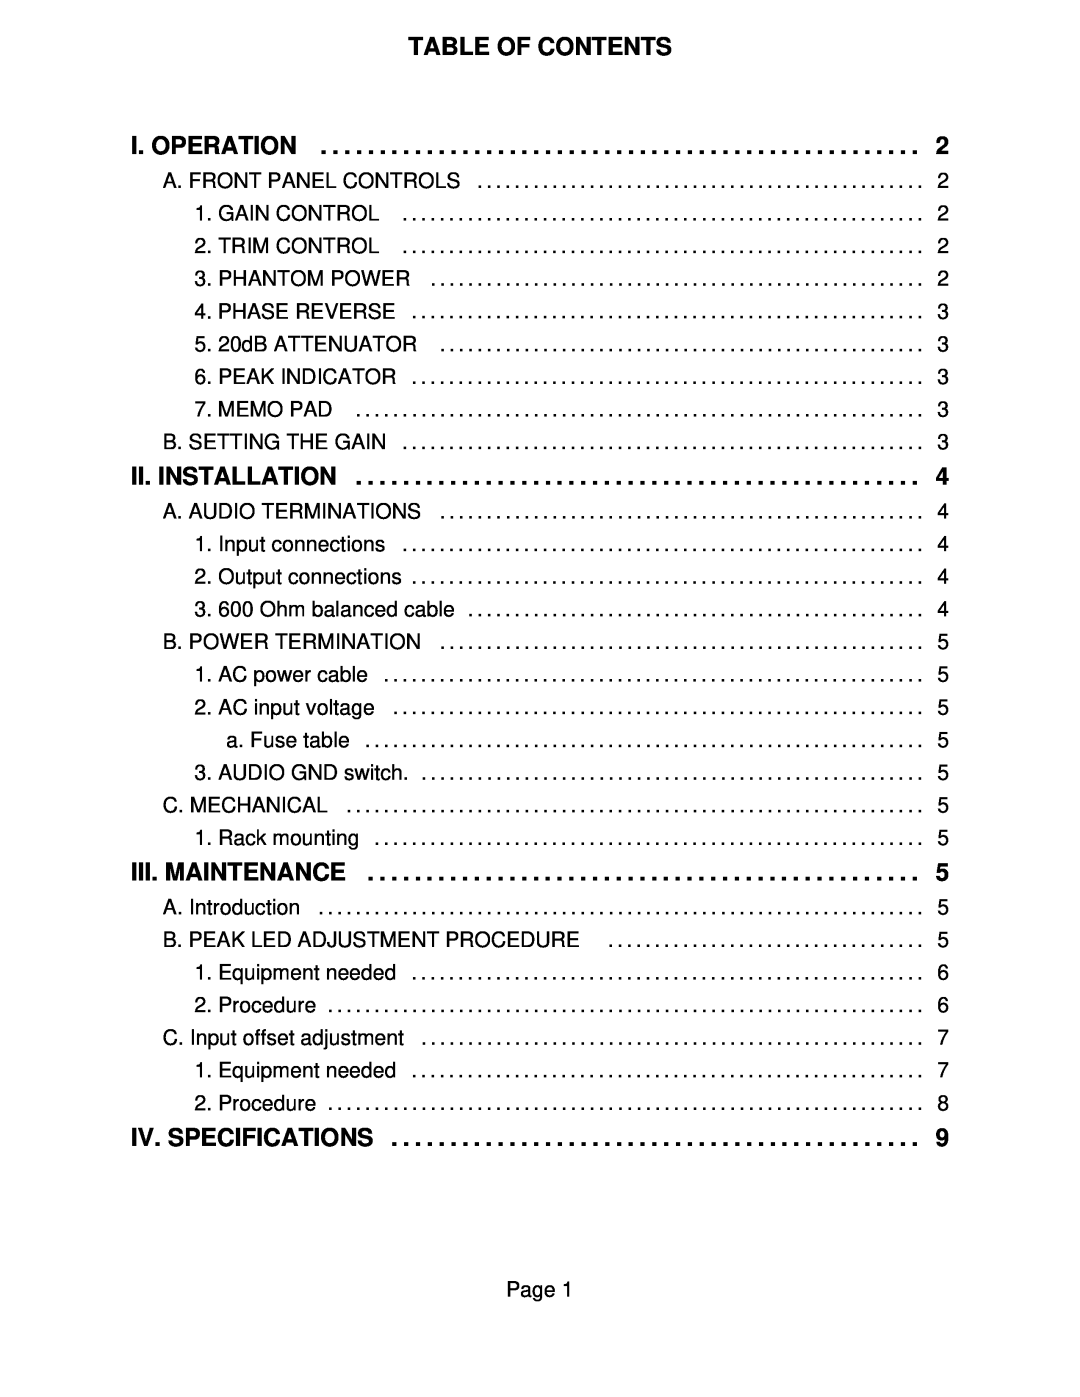 Microplane 201 owner manual Table Of Contents, I. Operation, Ii. Installation, Iii. Maintenance, Iv. Specifications 